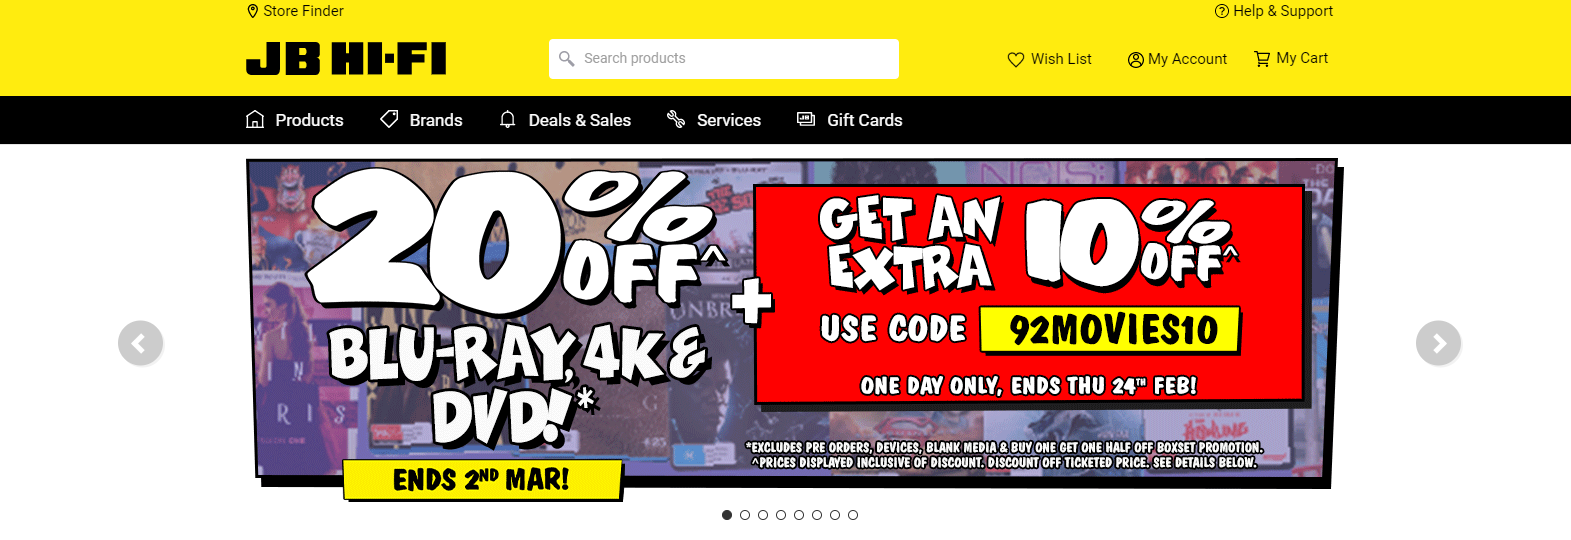 JB Hi-Fi extra 20% OFF on Blu-Ray, 4K & DVDs + extra 10% OFF with promo code